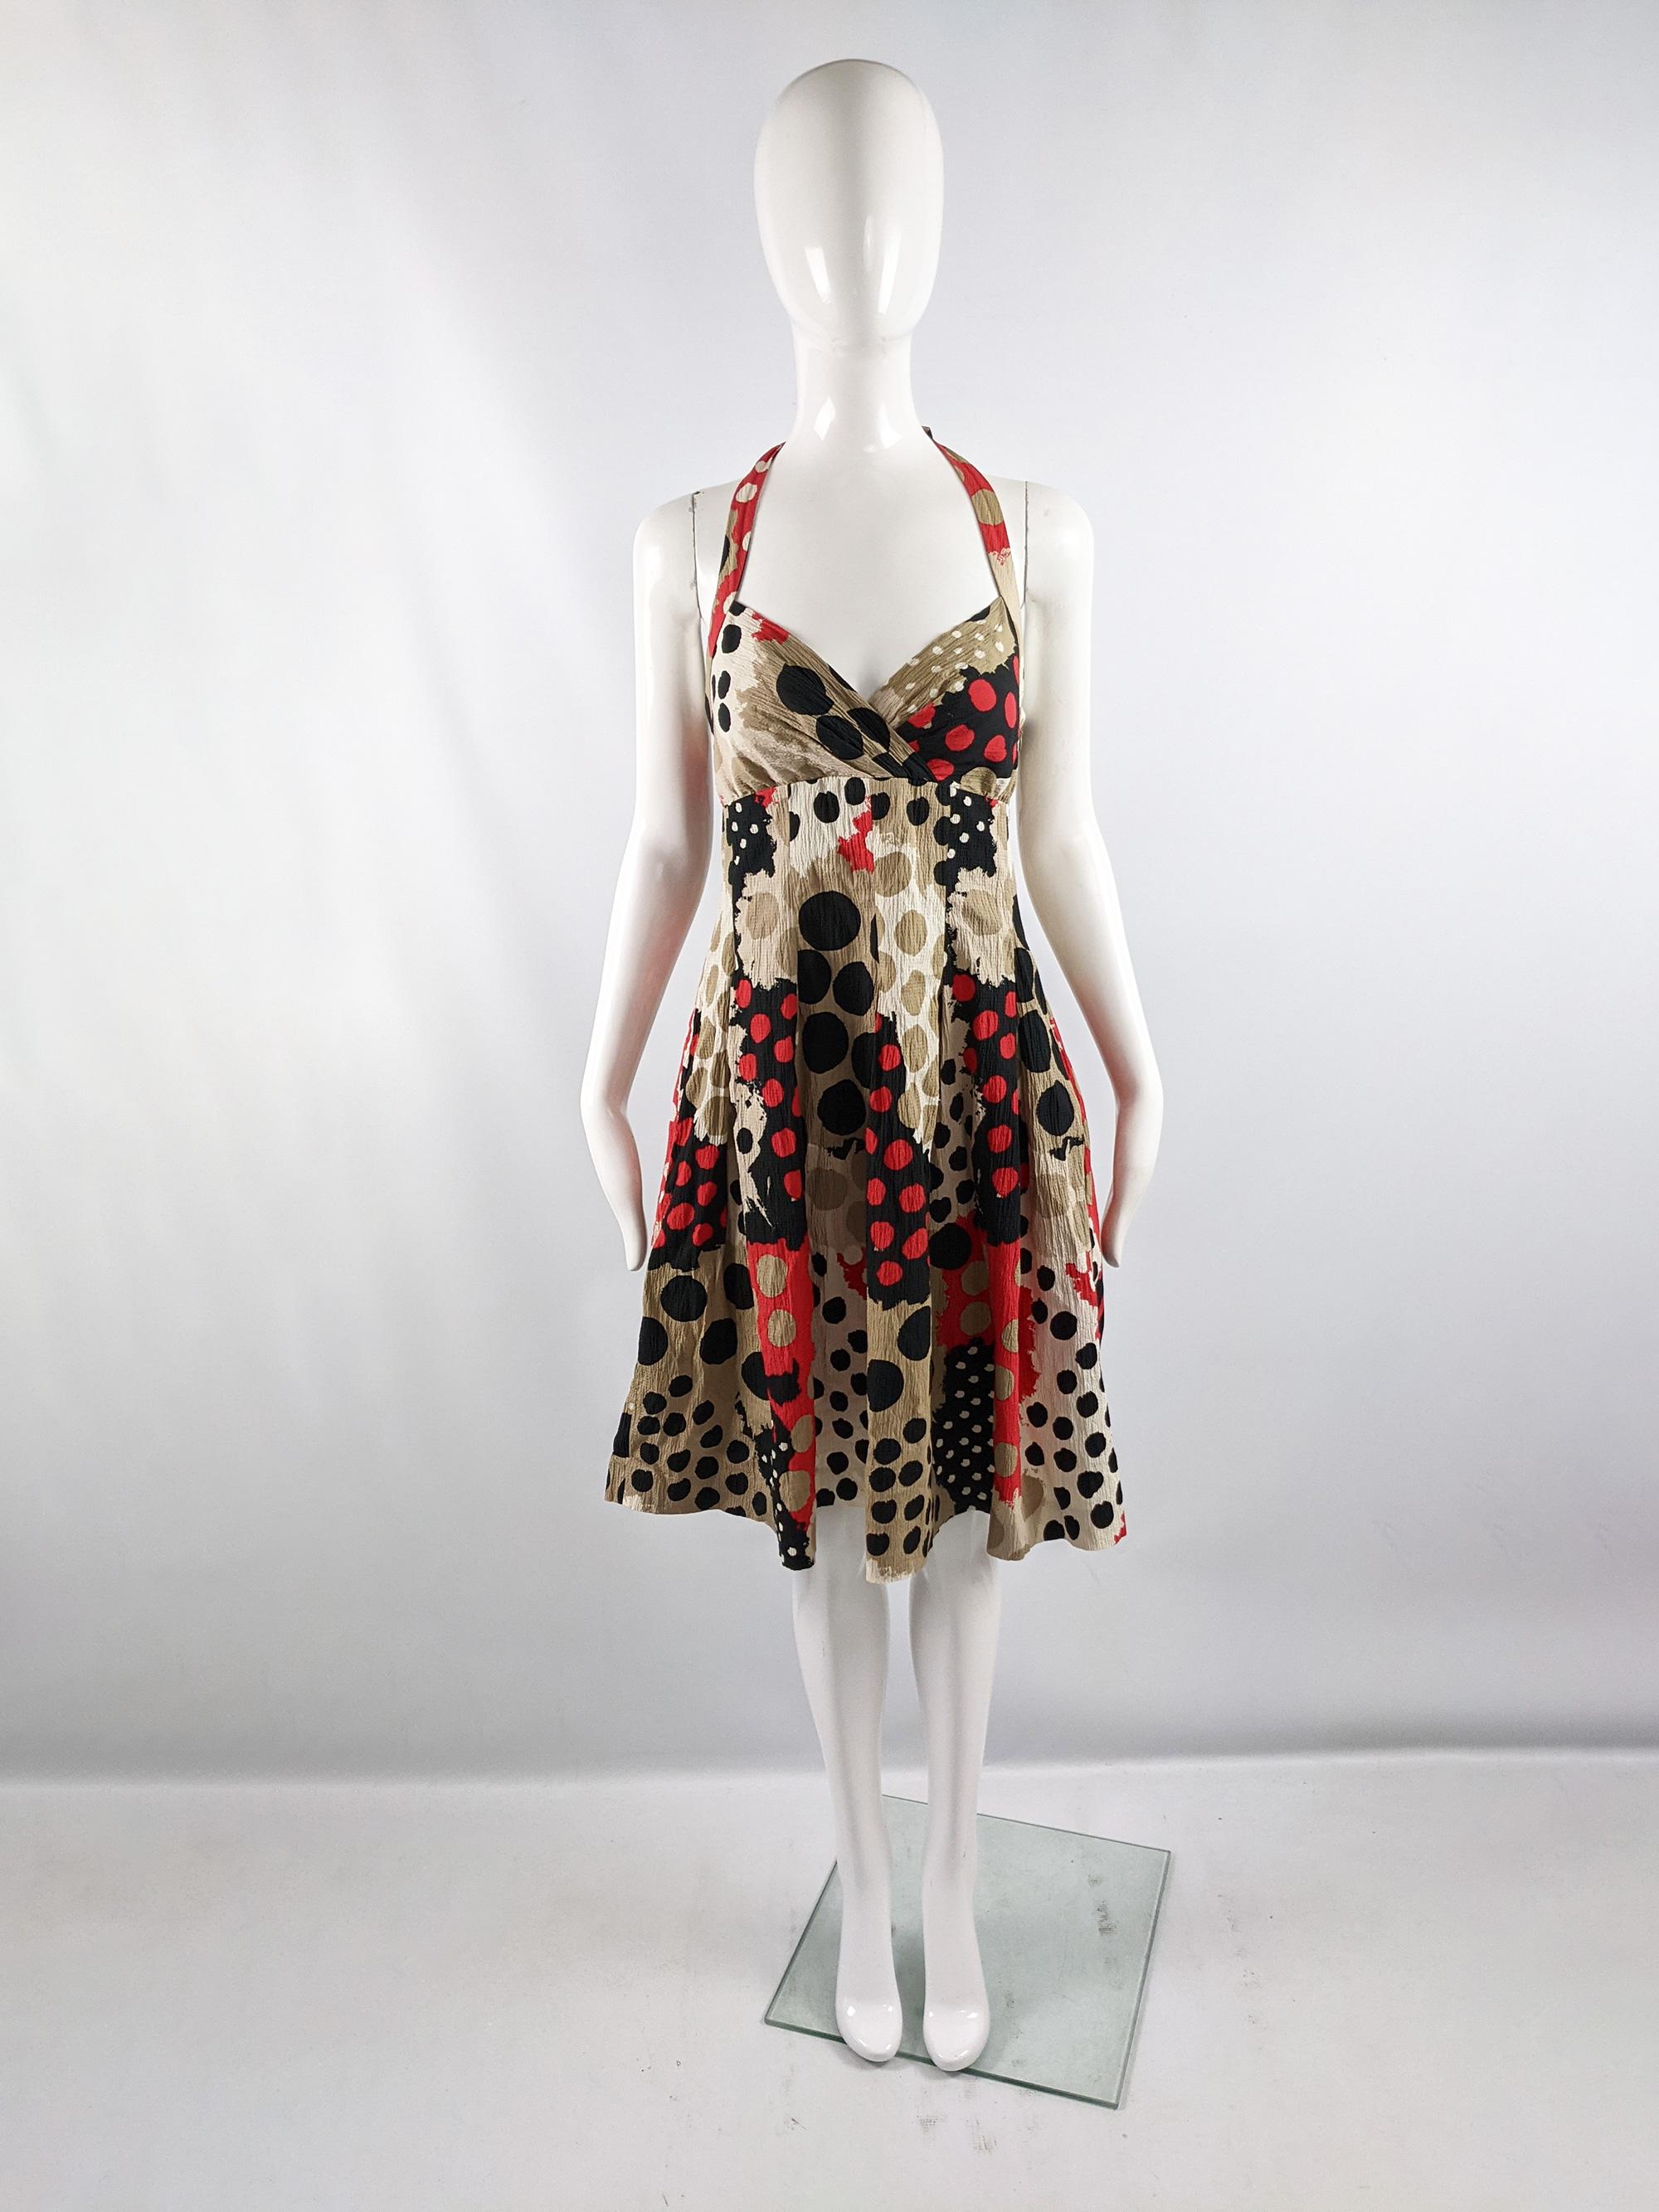 A pretty vintage Moschino dress from the early 2000s. In a crinkled cotton and silk blend with a halter neck and bright red, brown, cream and black abstract polka dot pattern. Perfect for both in the day, in spring and summer, or dressed up at a